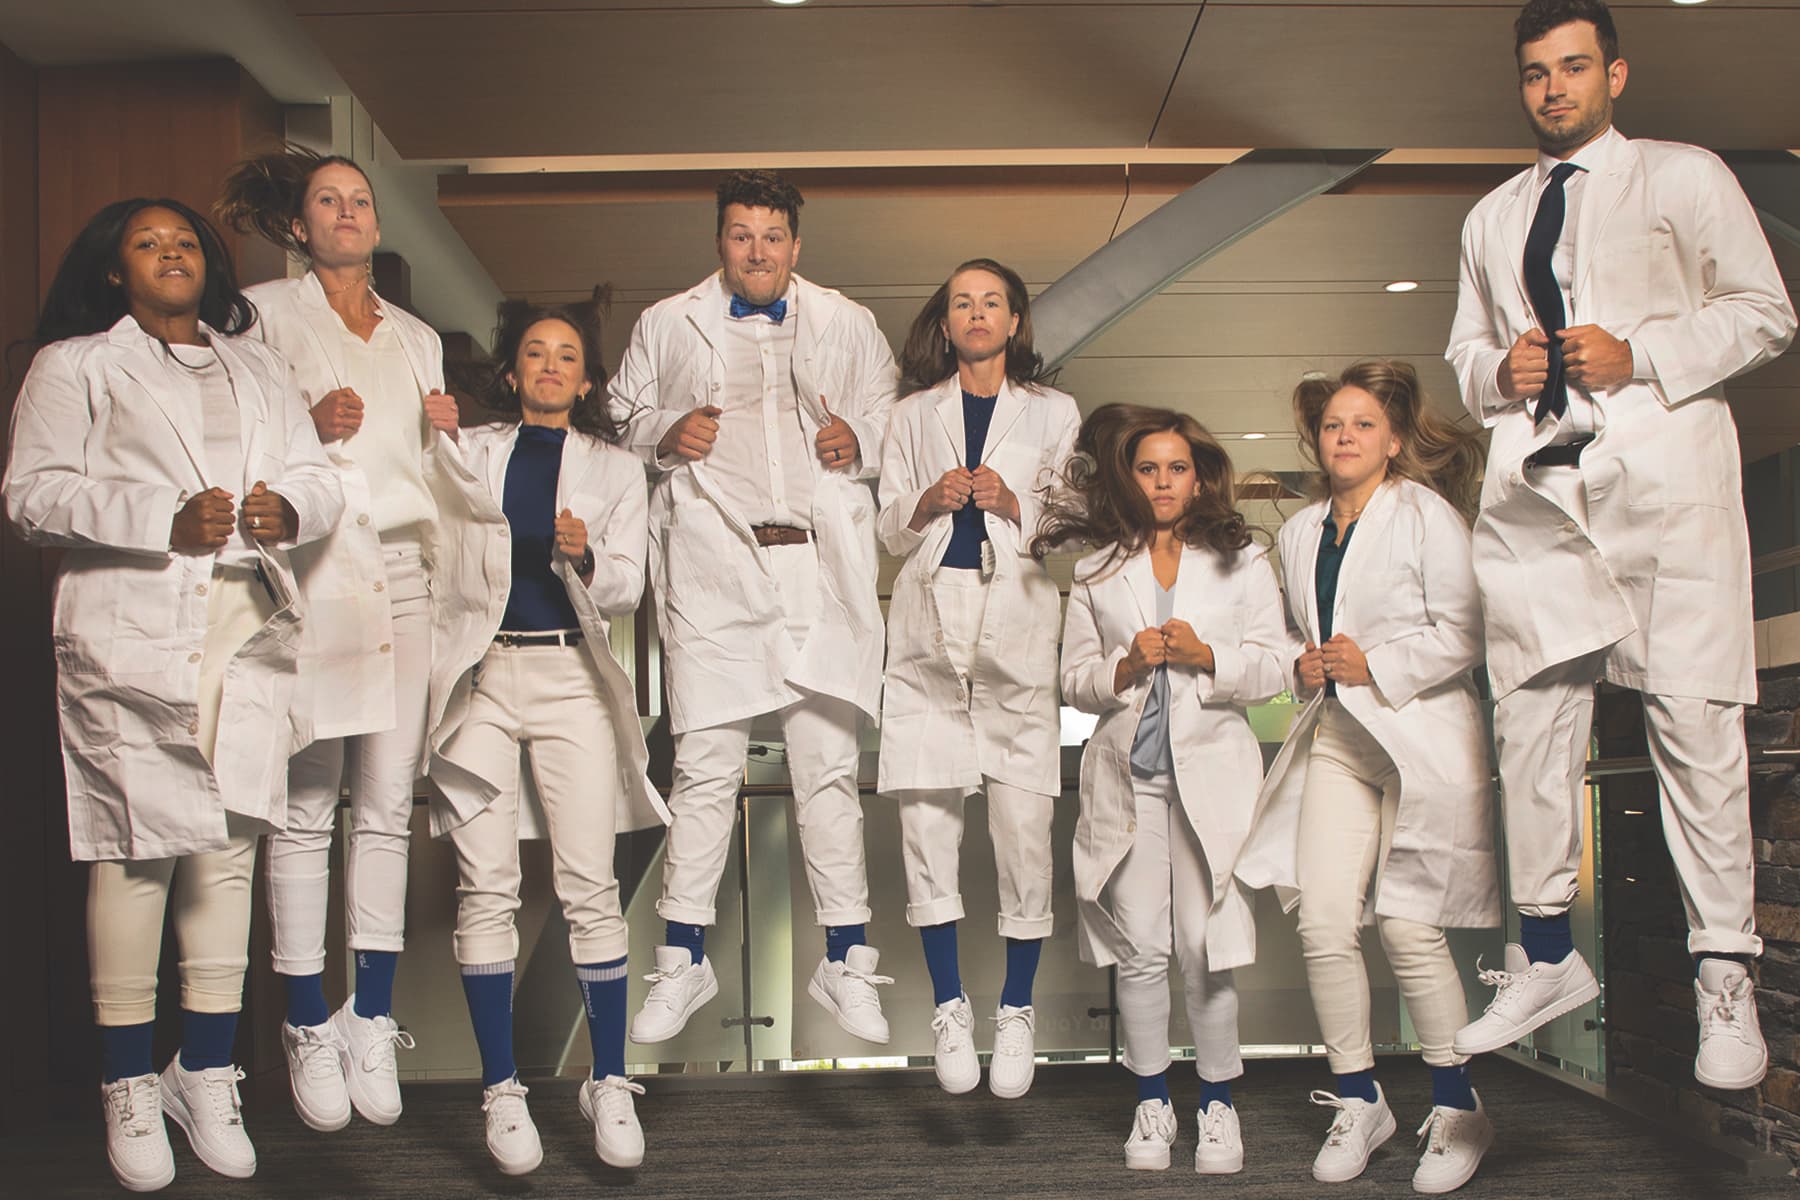 Orthopaedic surgery residents after receiving their white coats Photo by Chris Hildreth